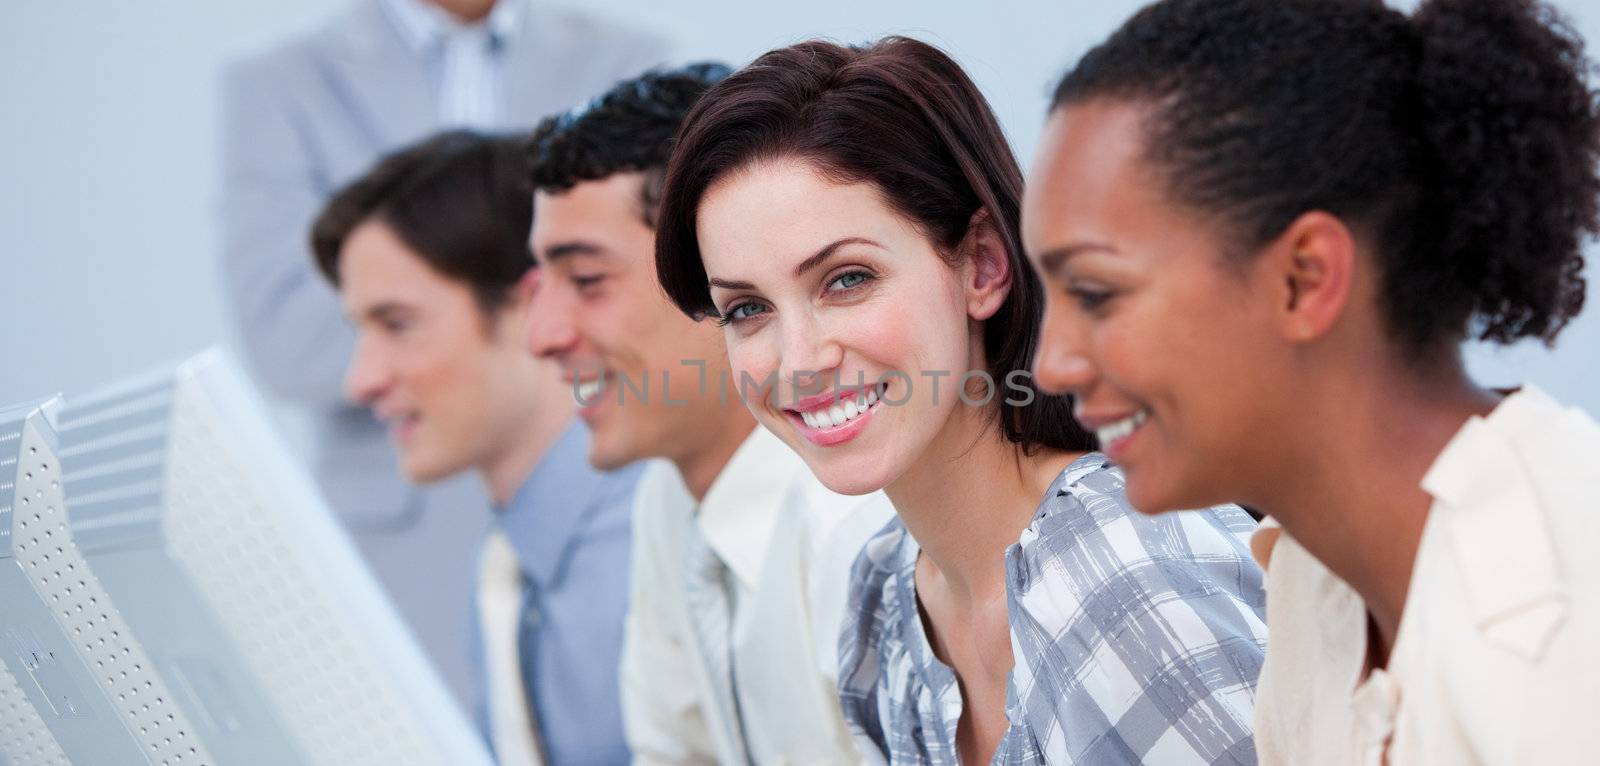 Smiling business people showing ethnic diversity  by Wavebreakmedia